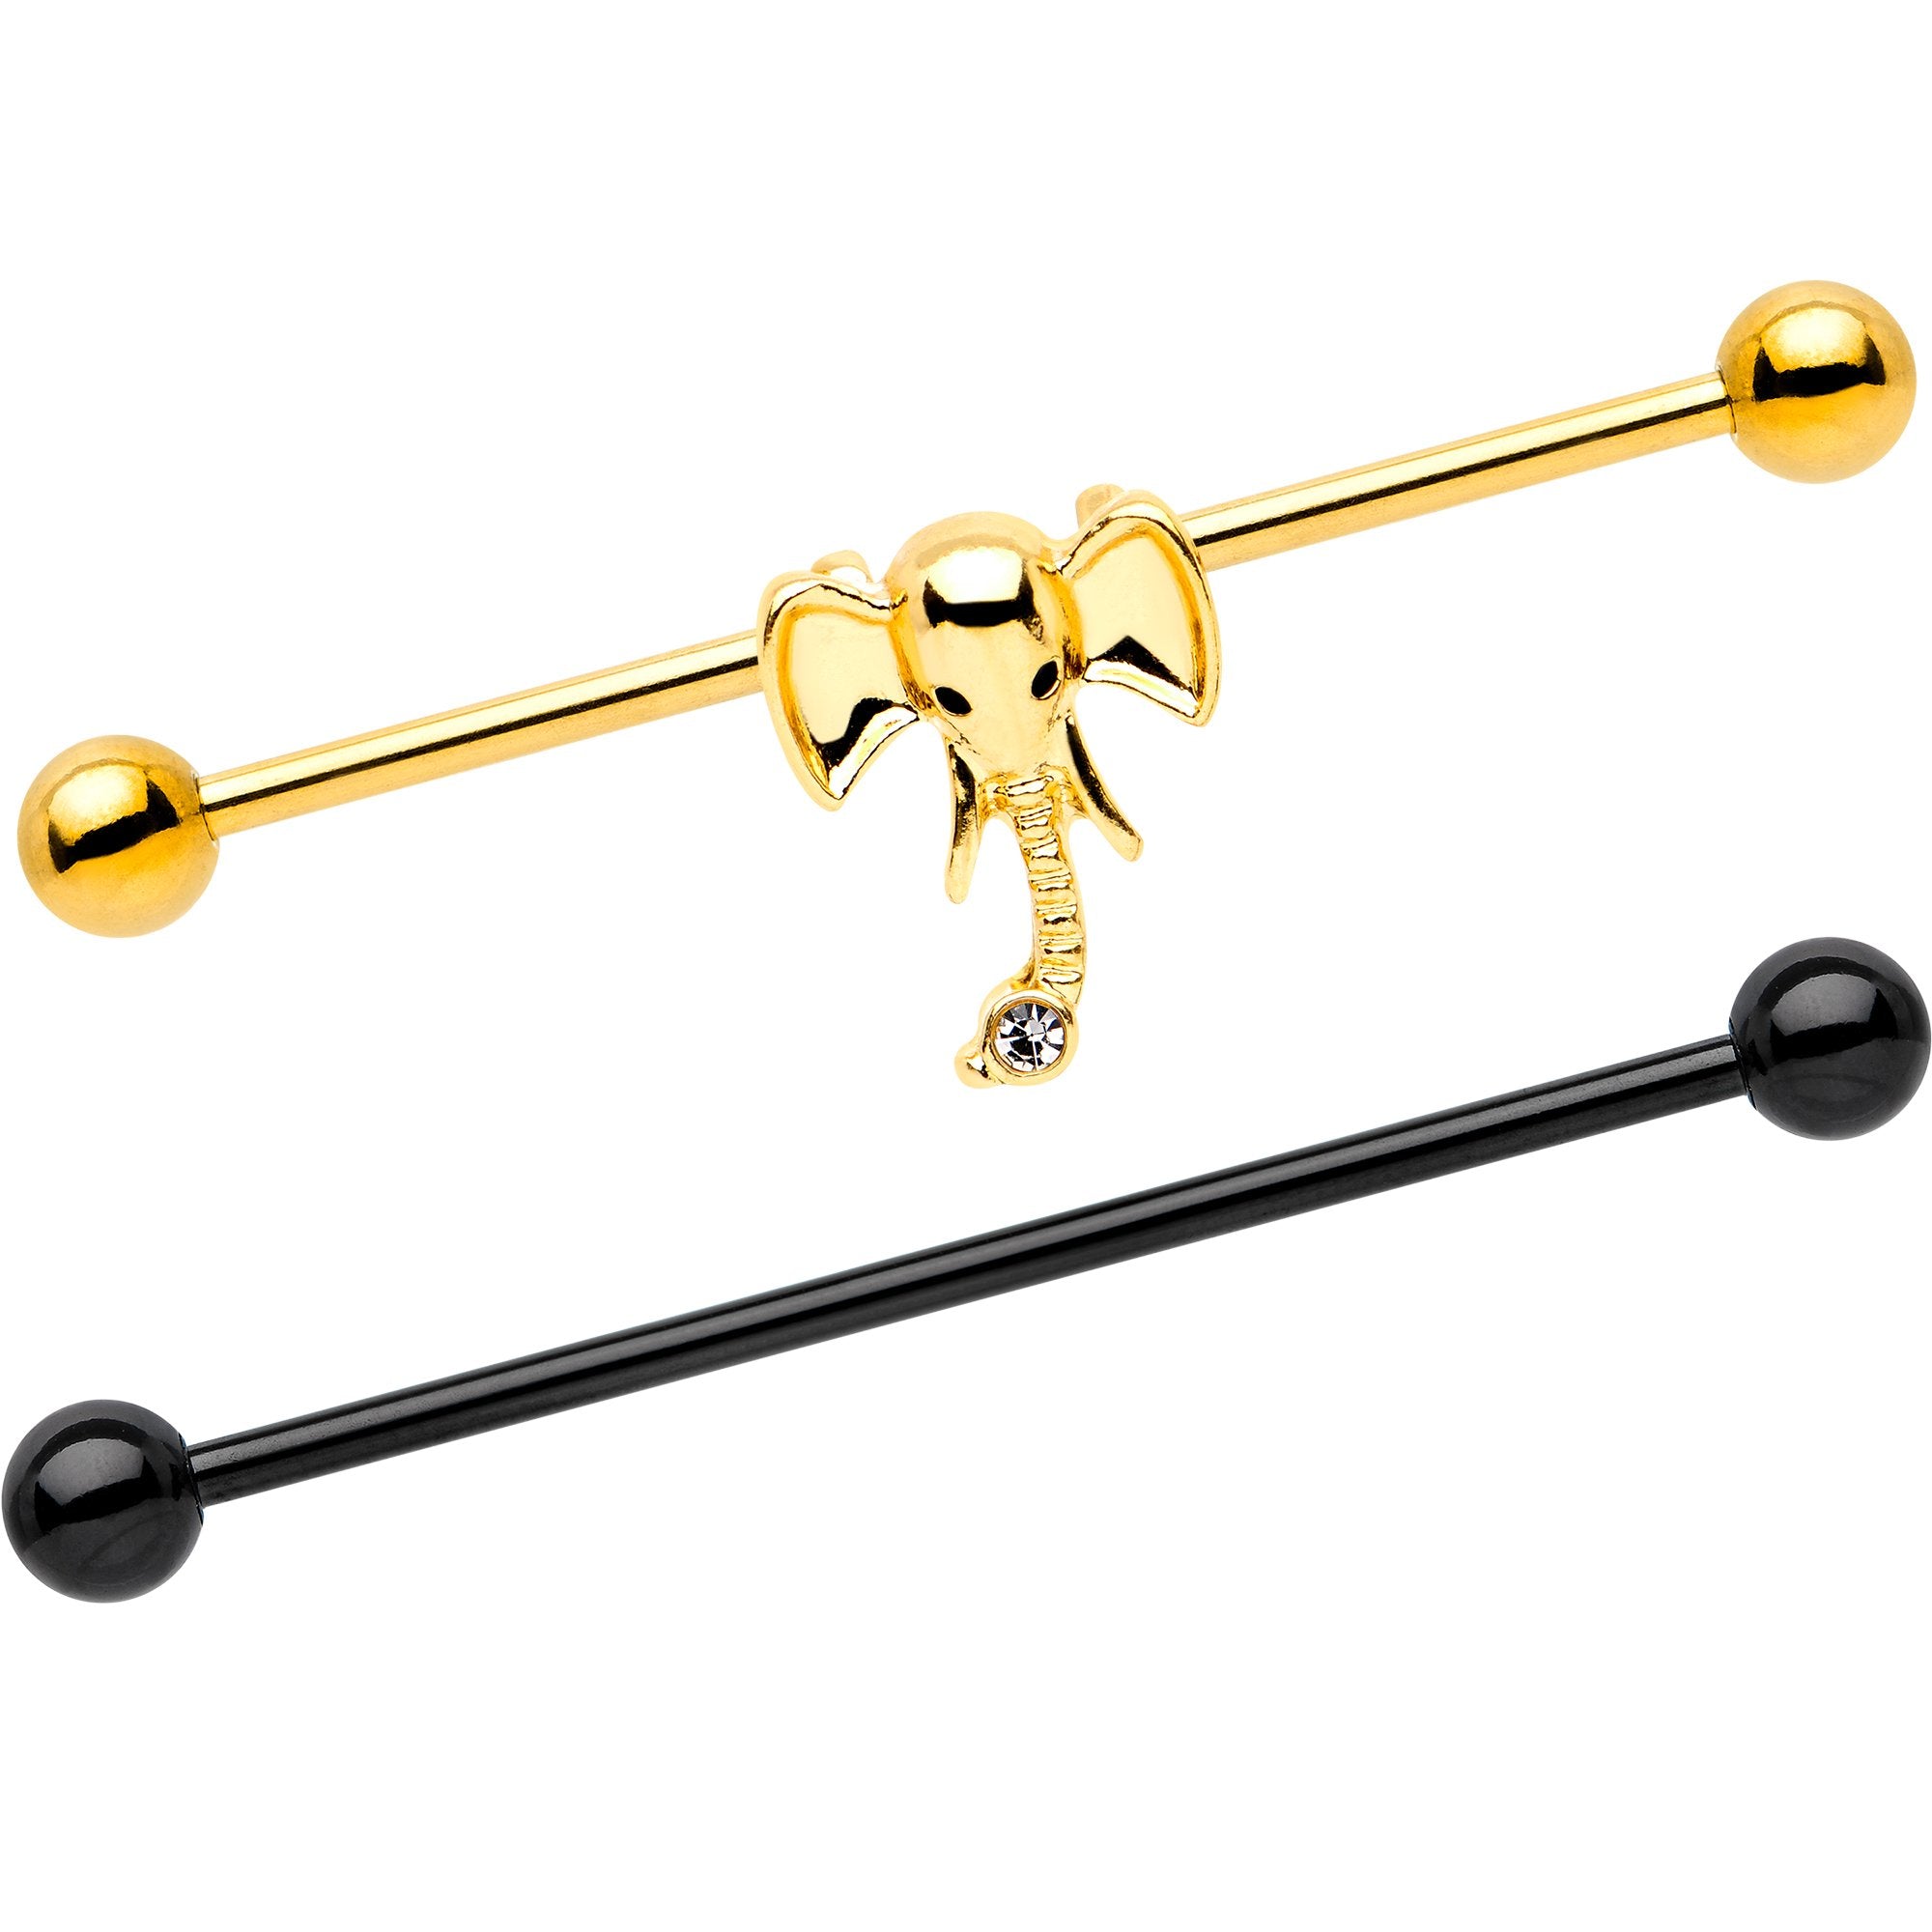 Black Gold Tone Anodized Elephant Industrial Barbell Set of 2